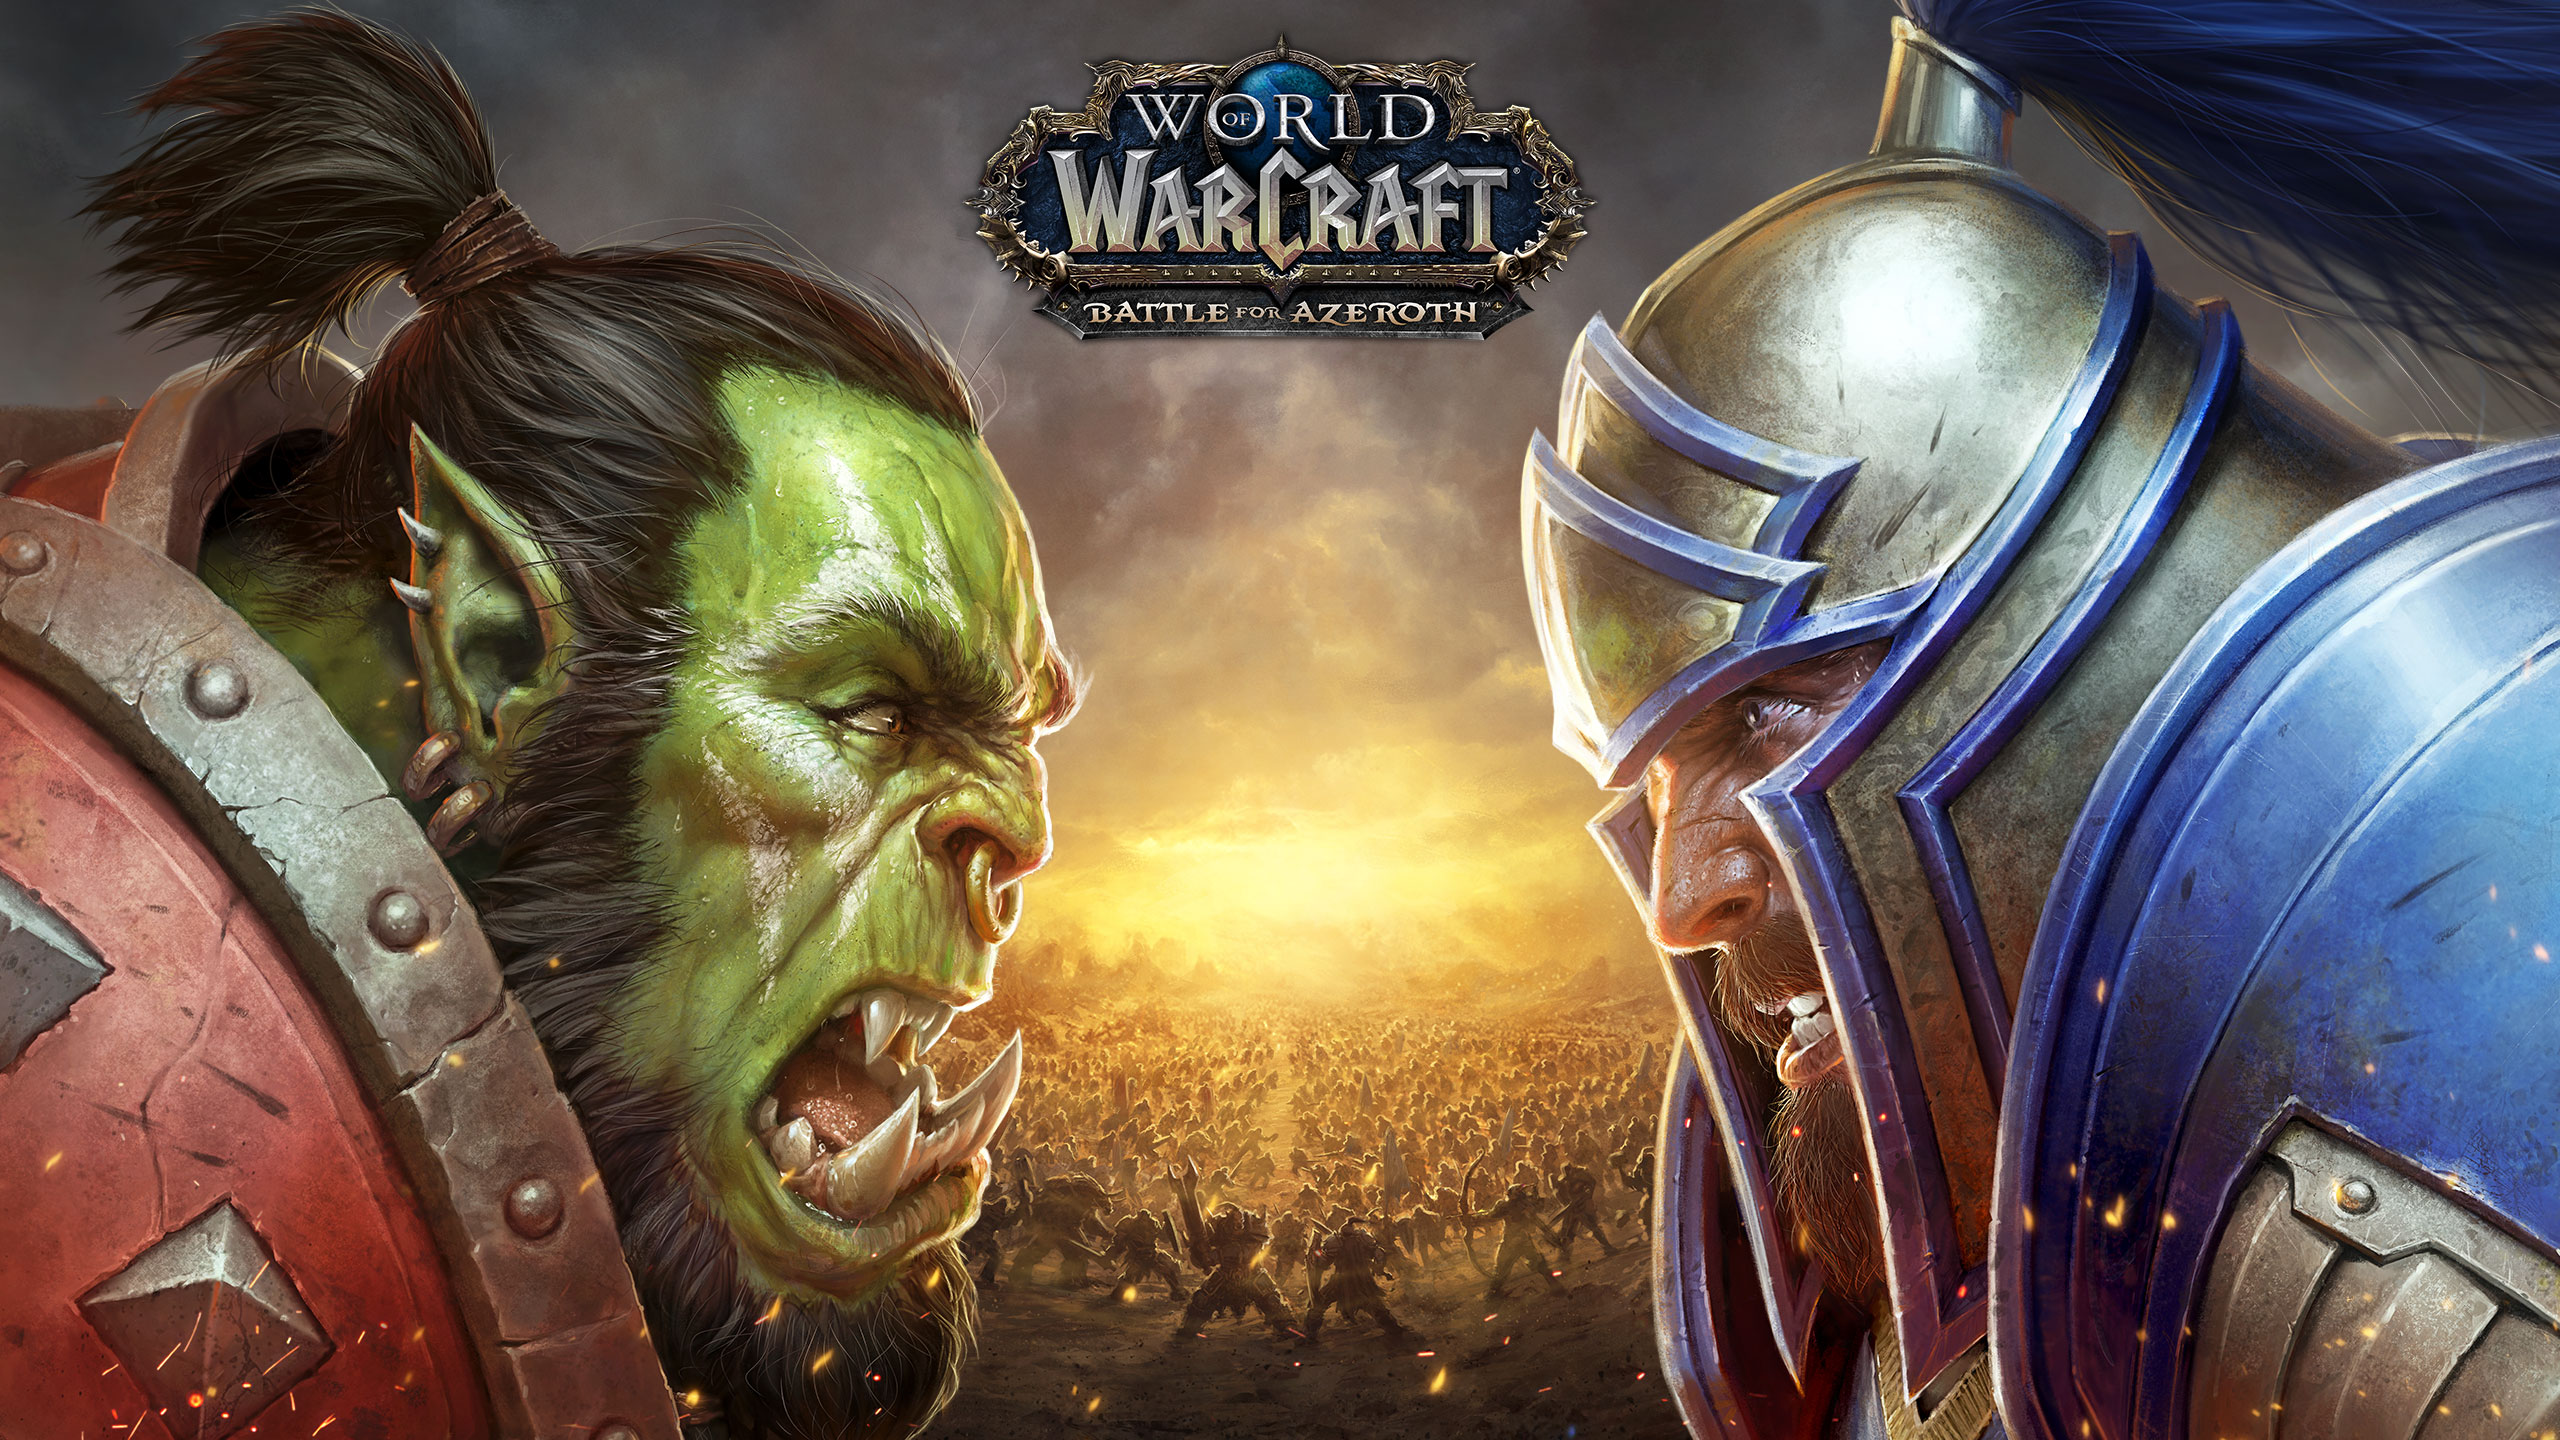 General 2560x1440 World of Warcraft: Battle for Azeroth video games artwork Orc horde Alliance Warcraft World of Warcraft Blizzard Entertainment